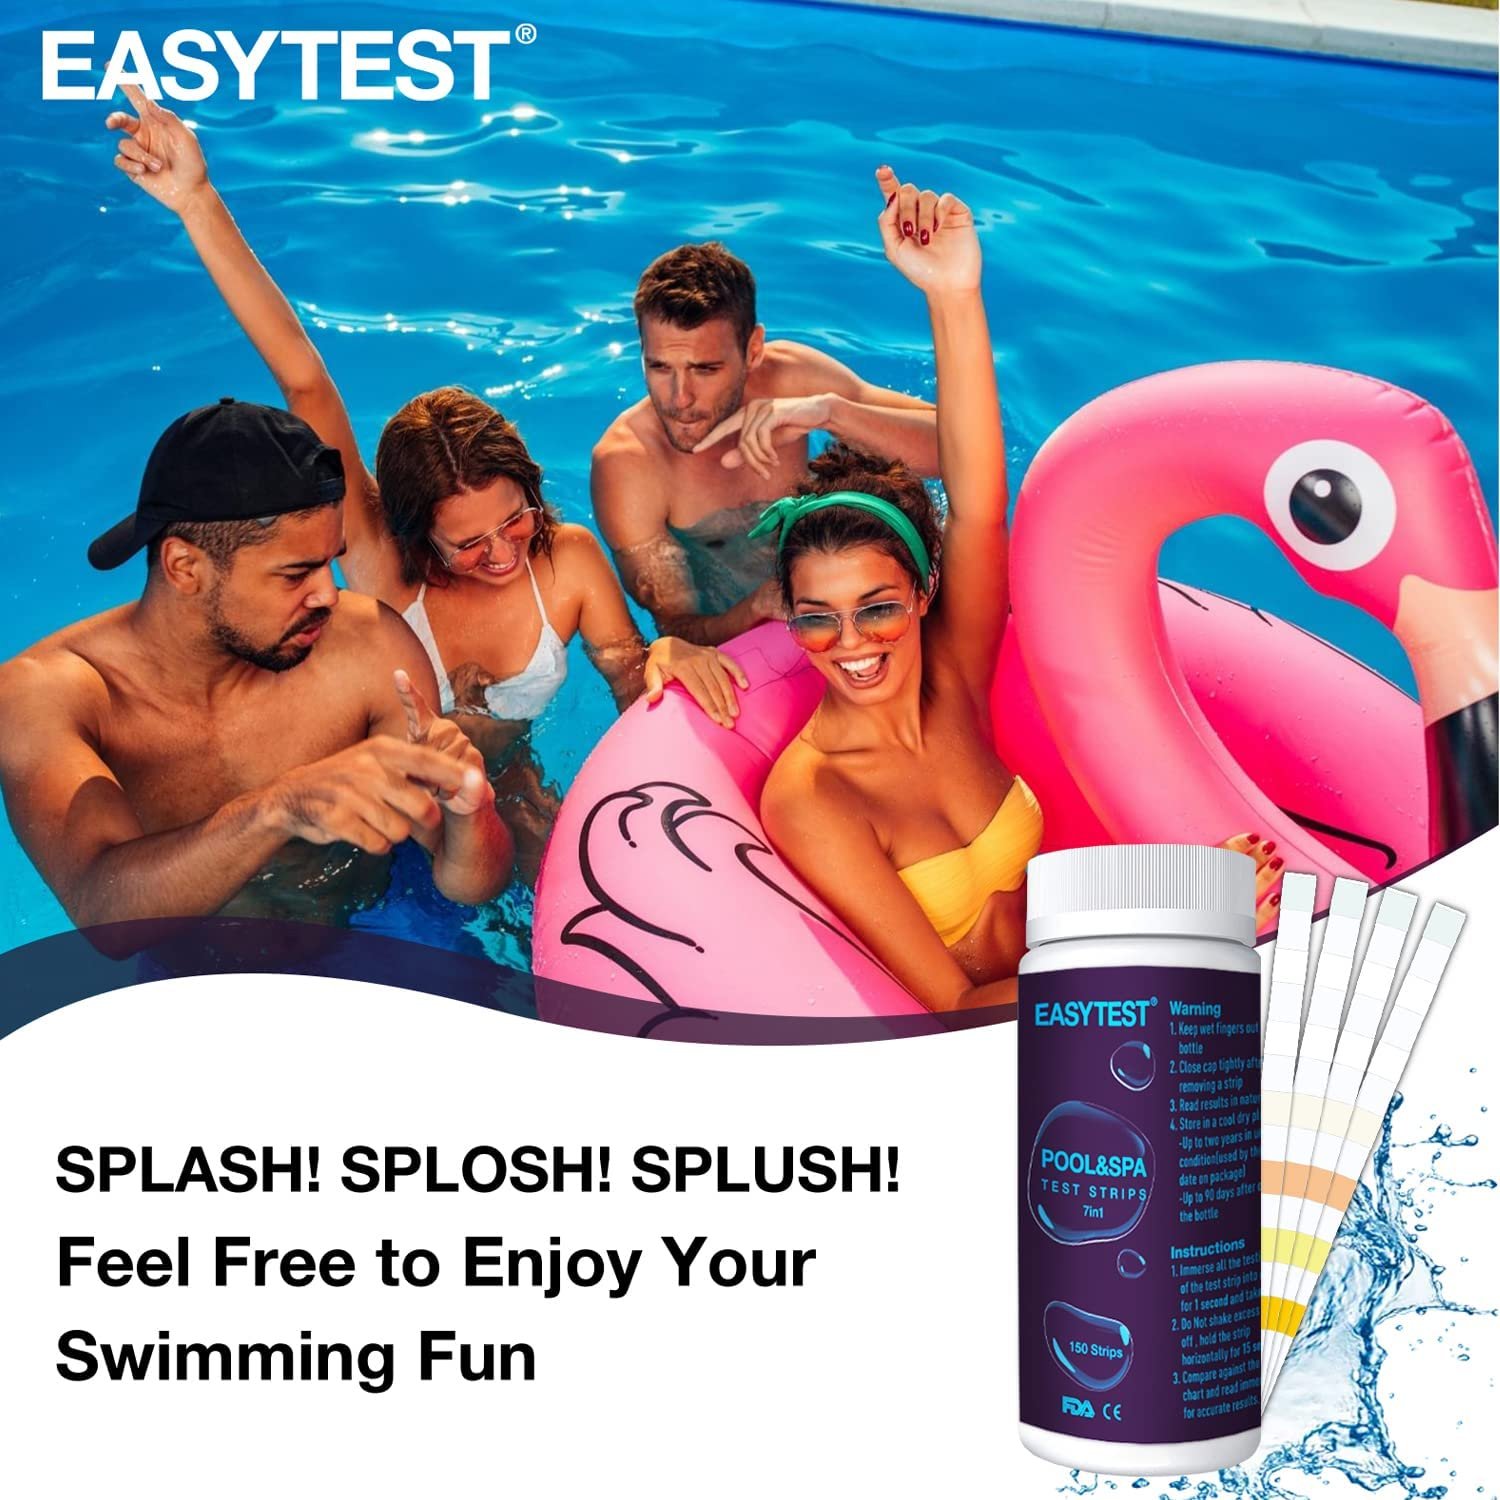 EASTTEST 7-Way Pool Test Strips For The Best Hot Tub And Spa Experience